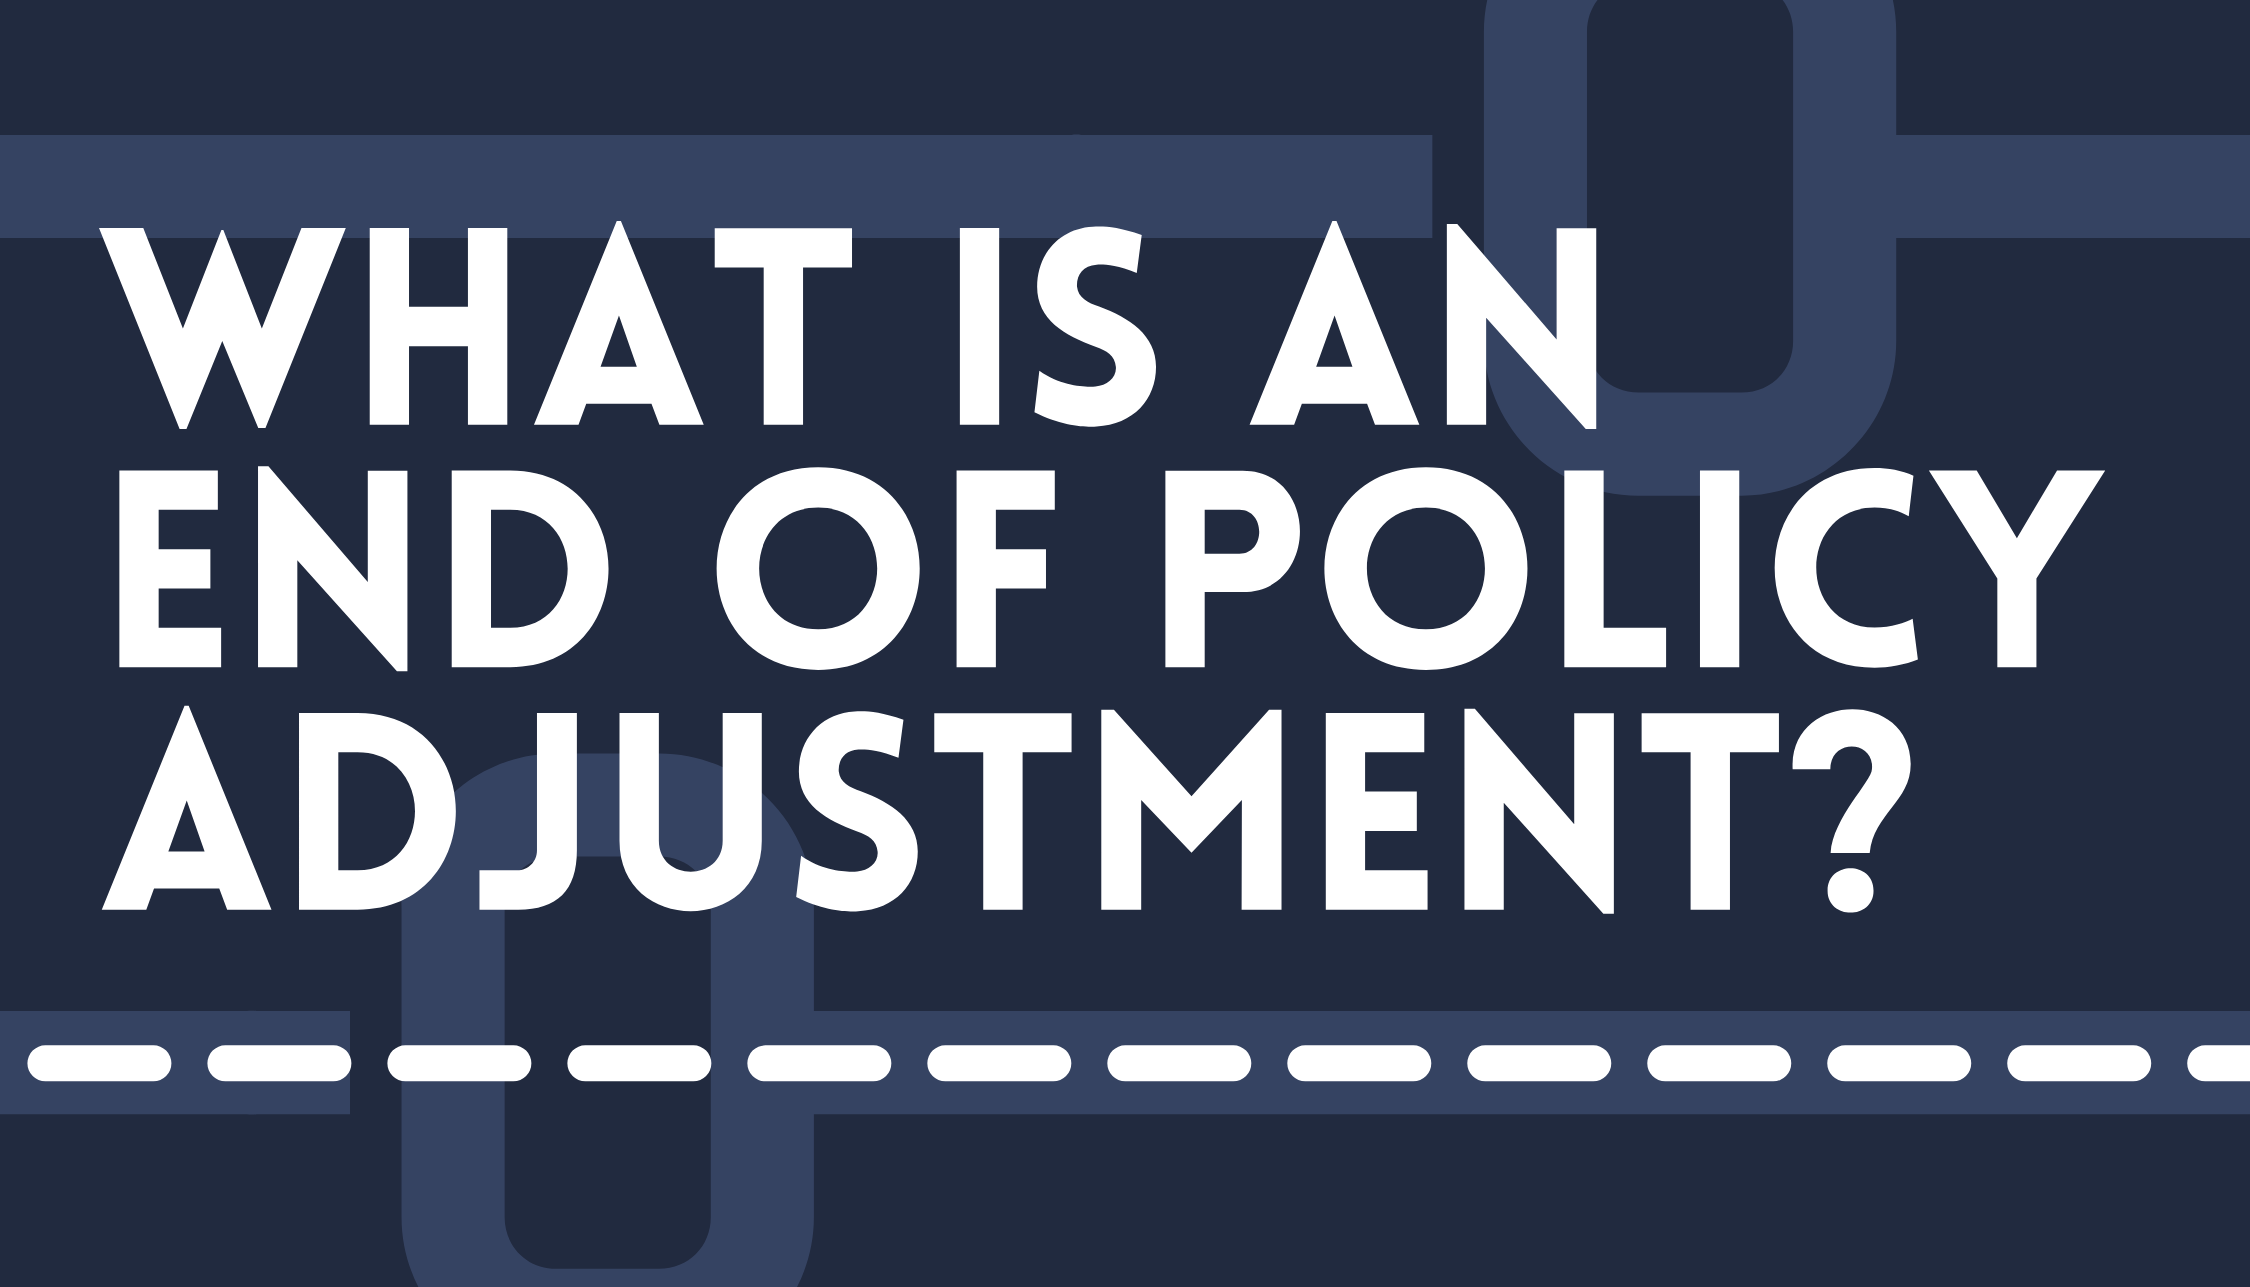 What is an End of Policy Adjustment?